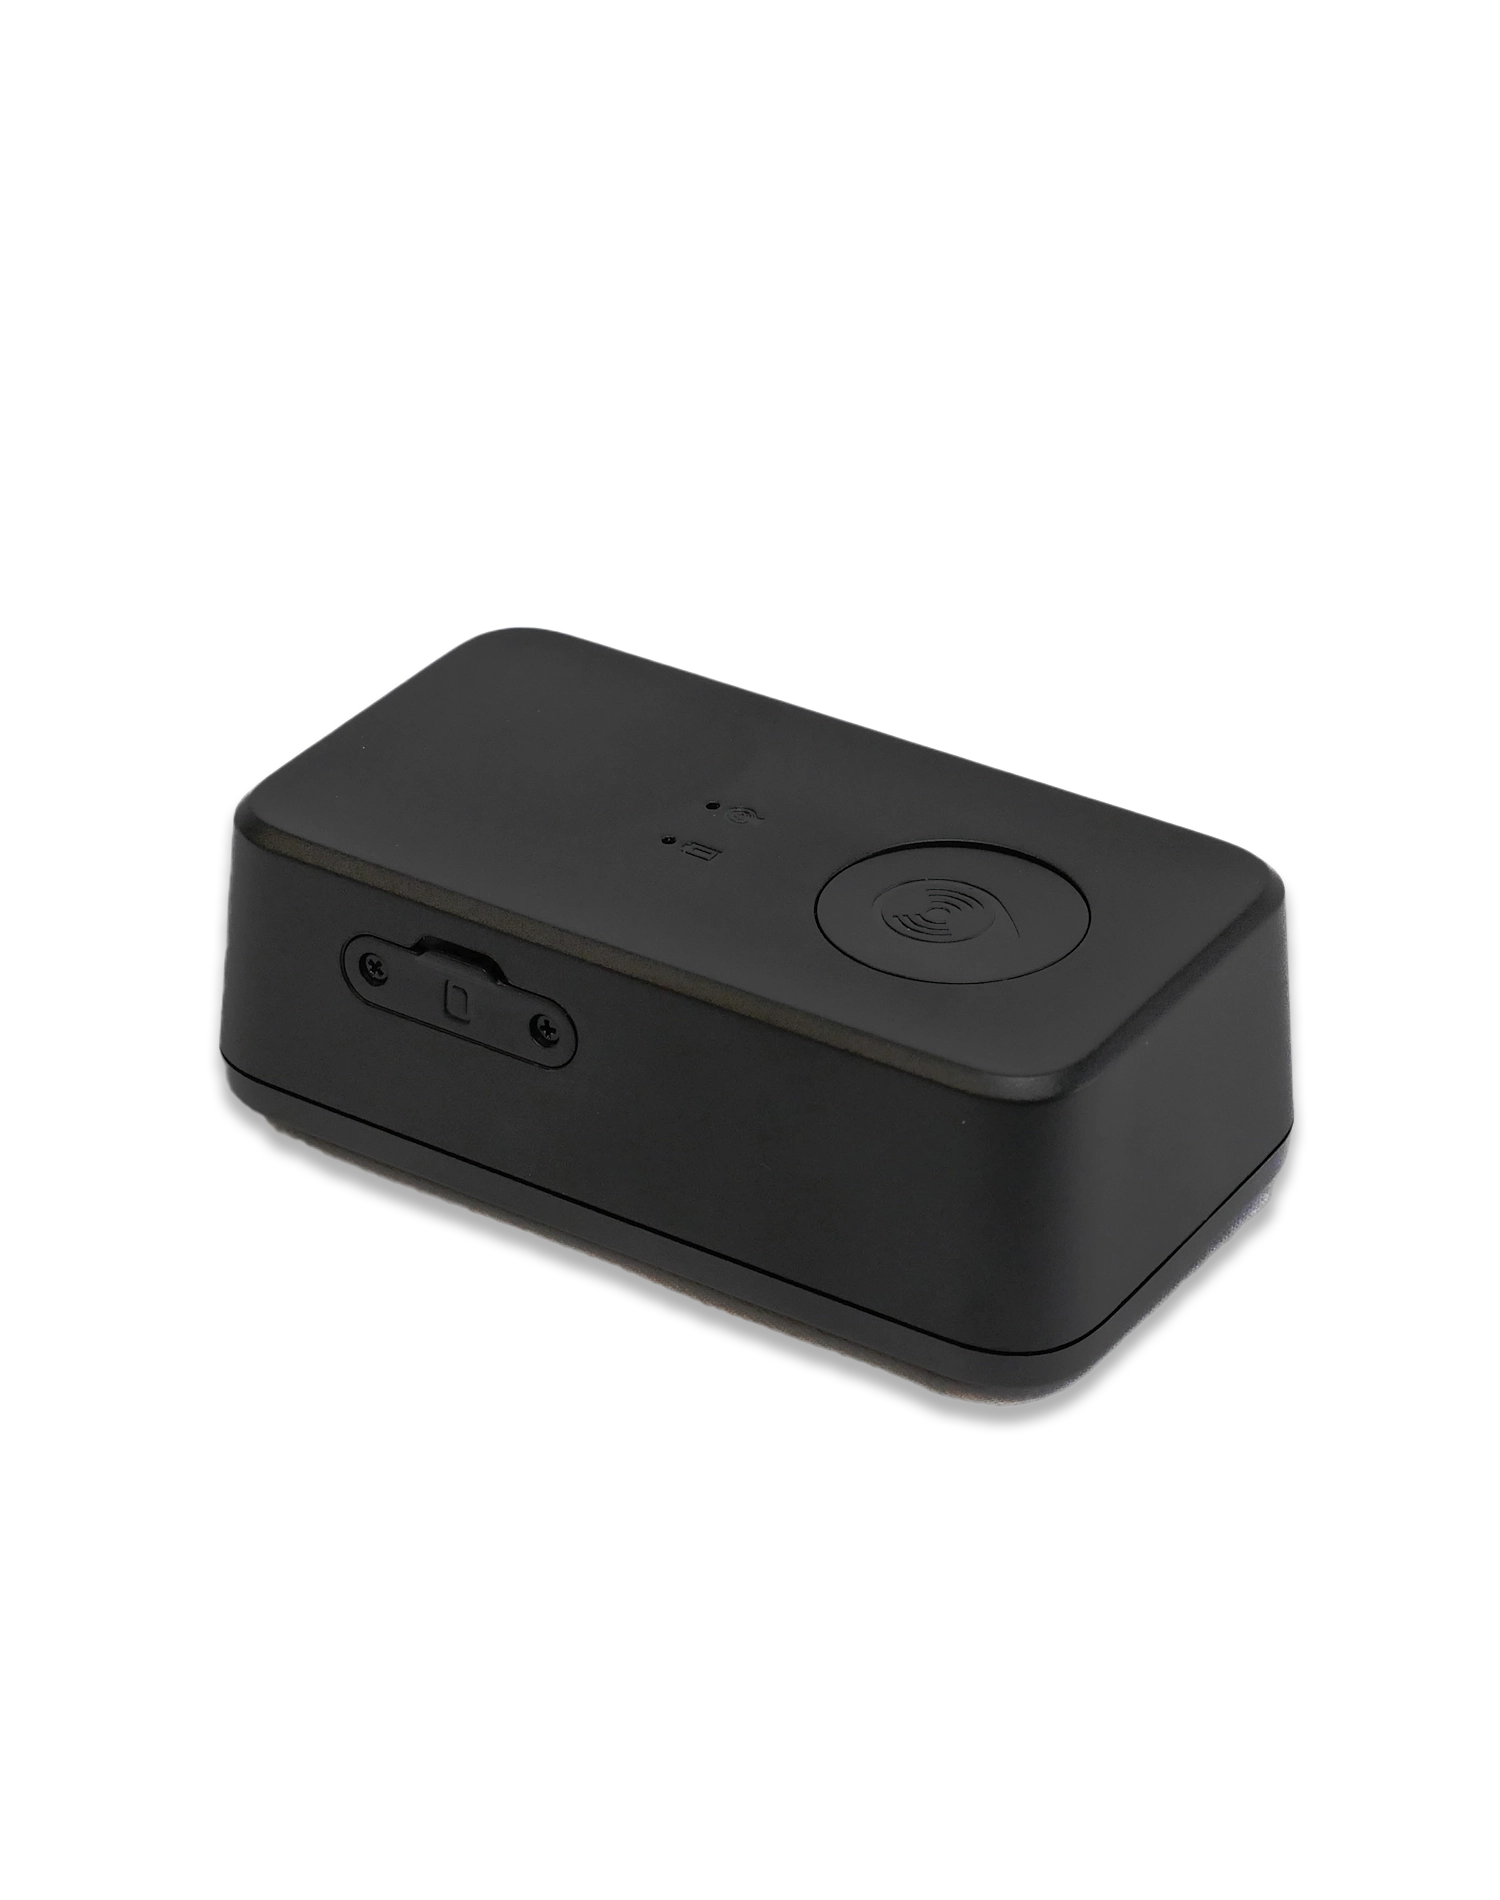 GPS Tracker Prime with no background